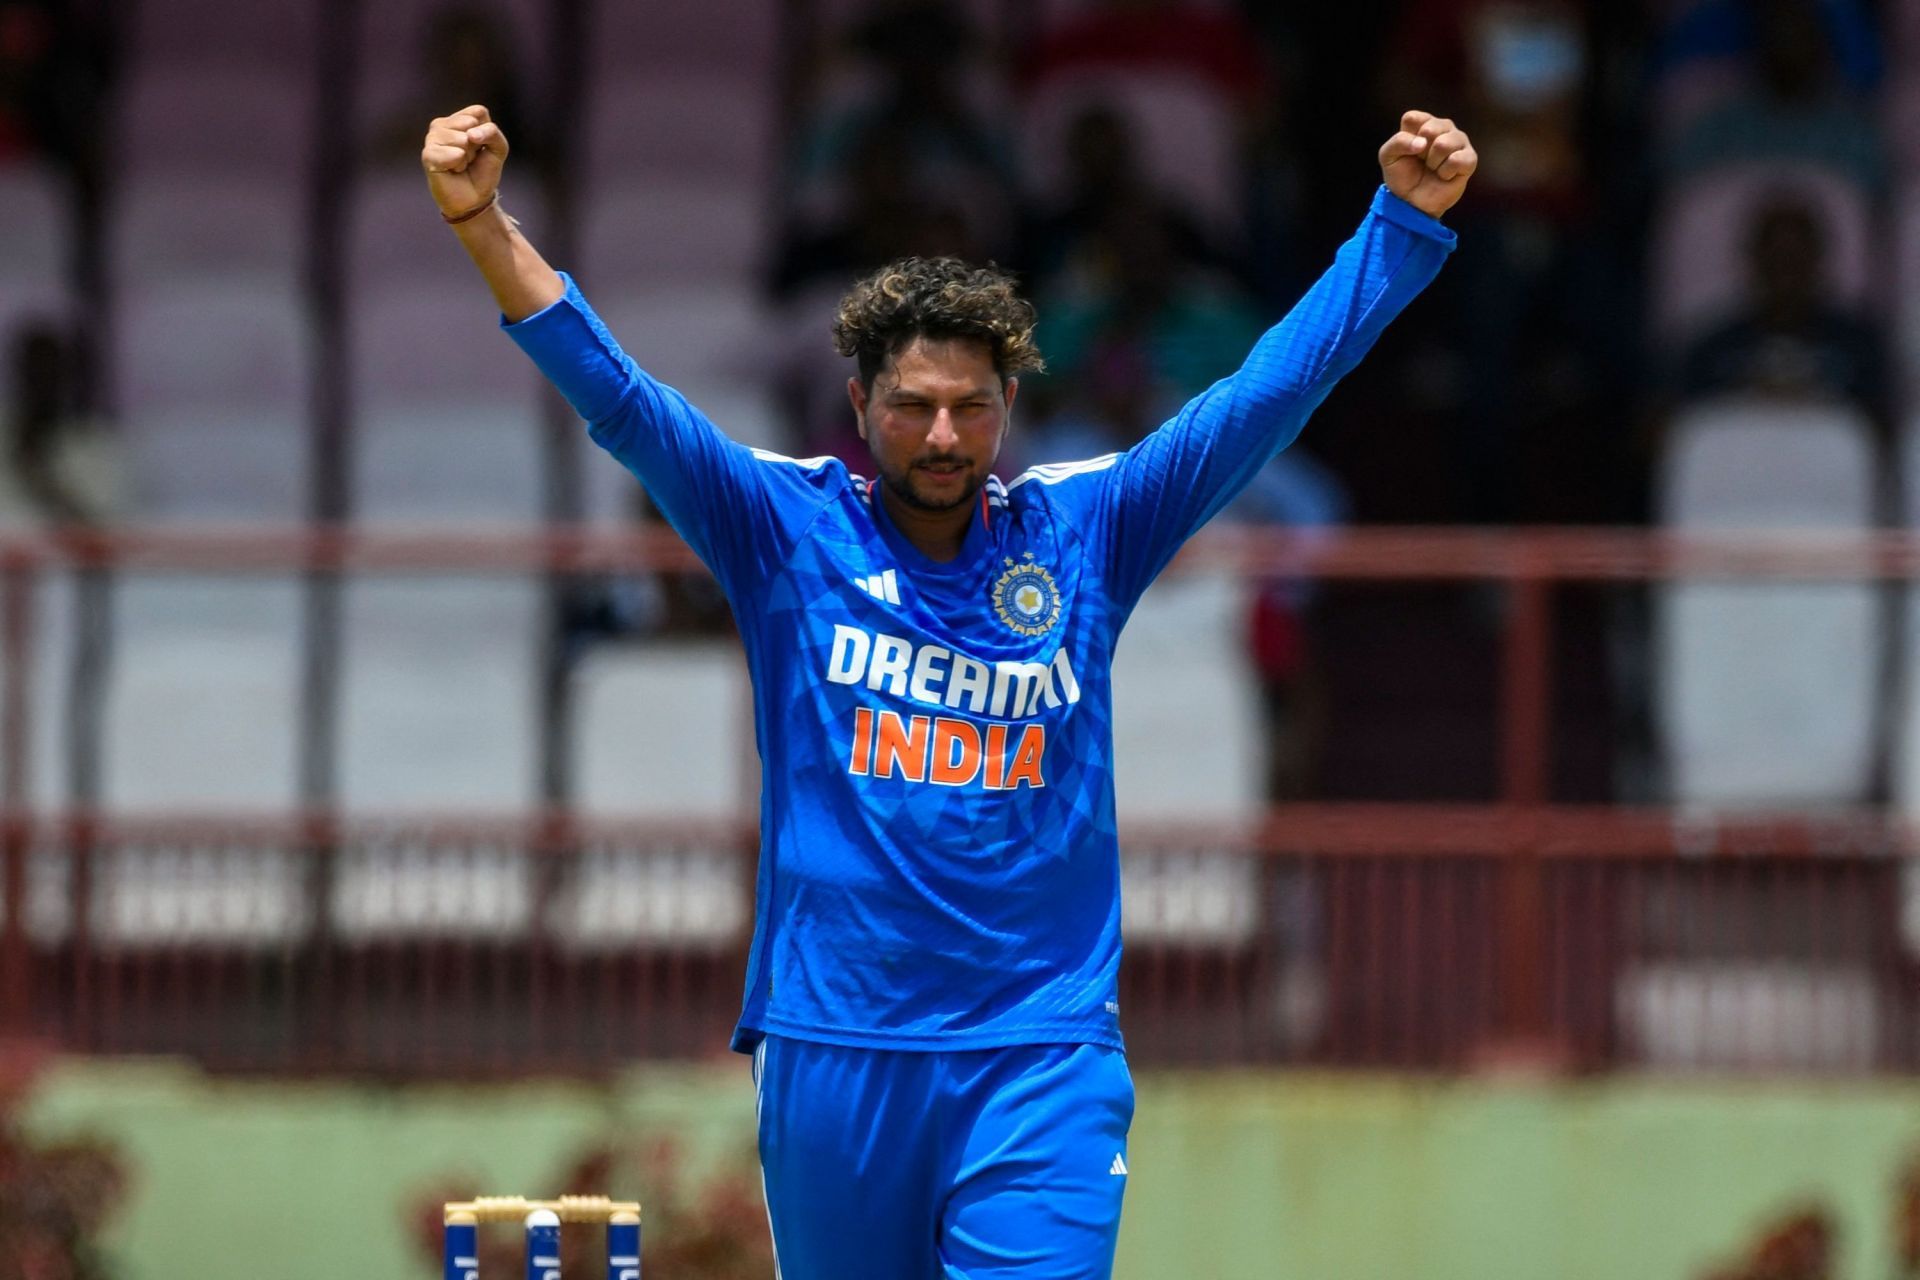 Kuldeep Yadav picked up three wickets after missing the second T20I